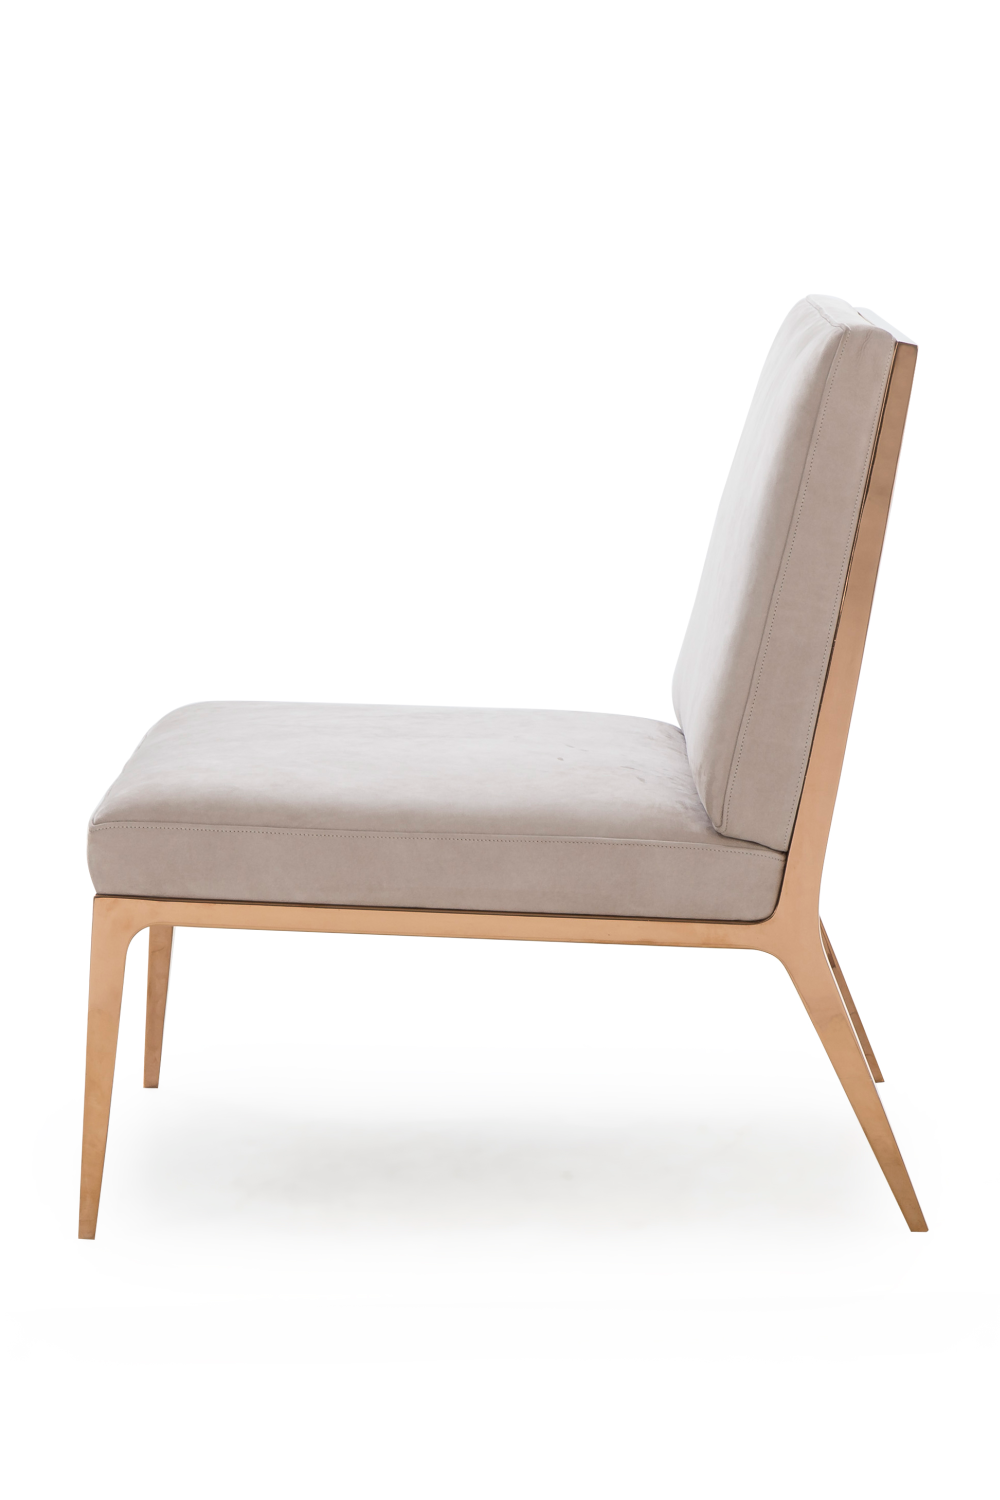 Upholstered Suede Lounge Chair | Andrew Martin Marley| Oroa.com